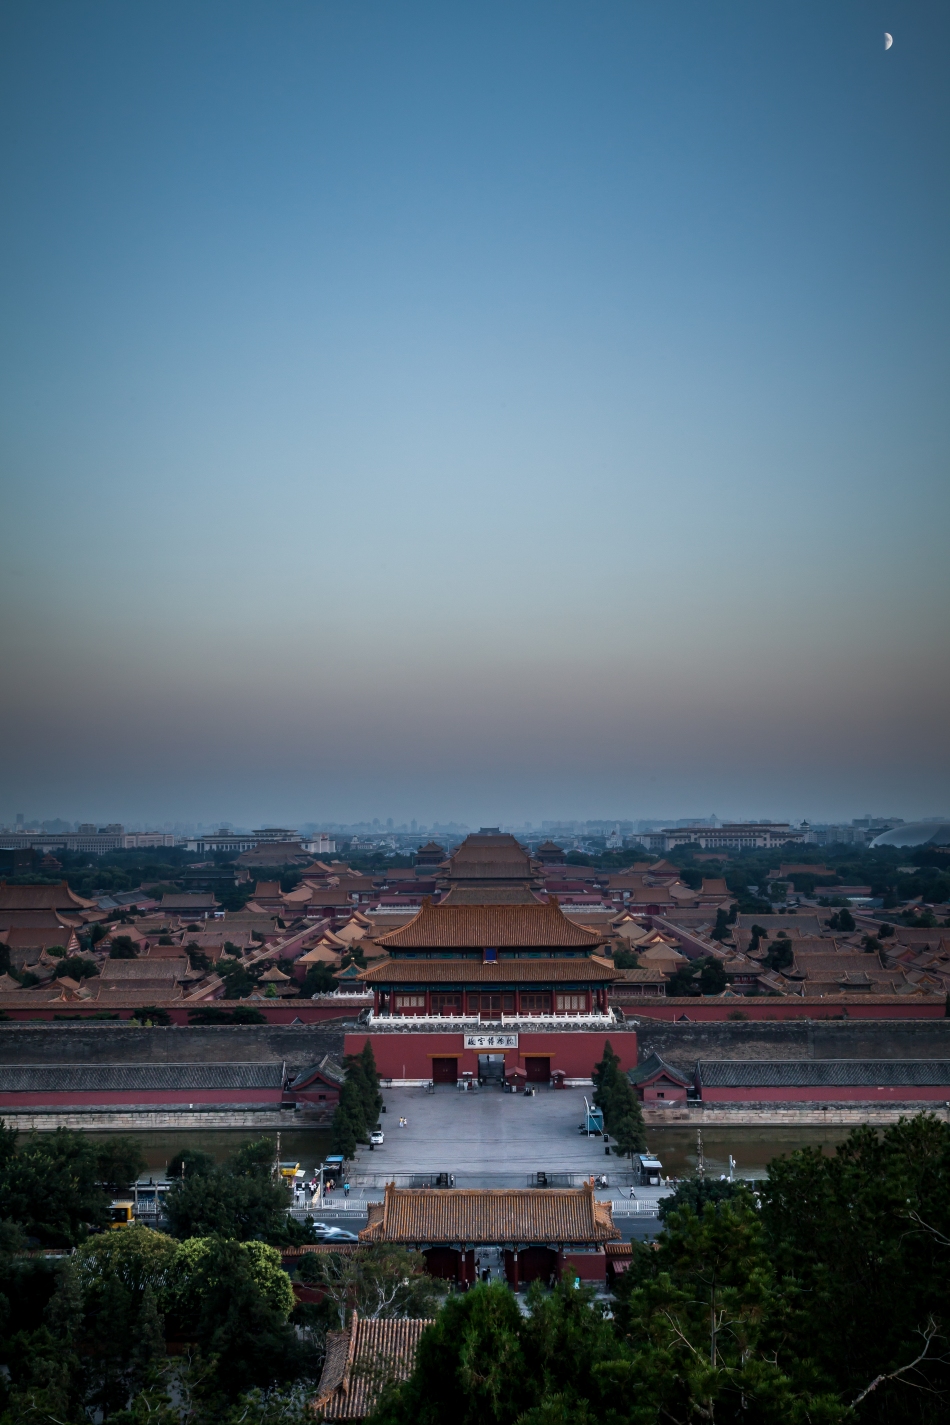 The Forbidden City (紫禁城), viewed from Jingshan Hill (景山) to the north